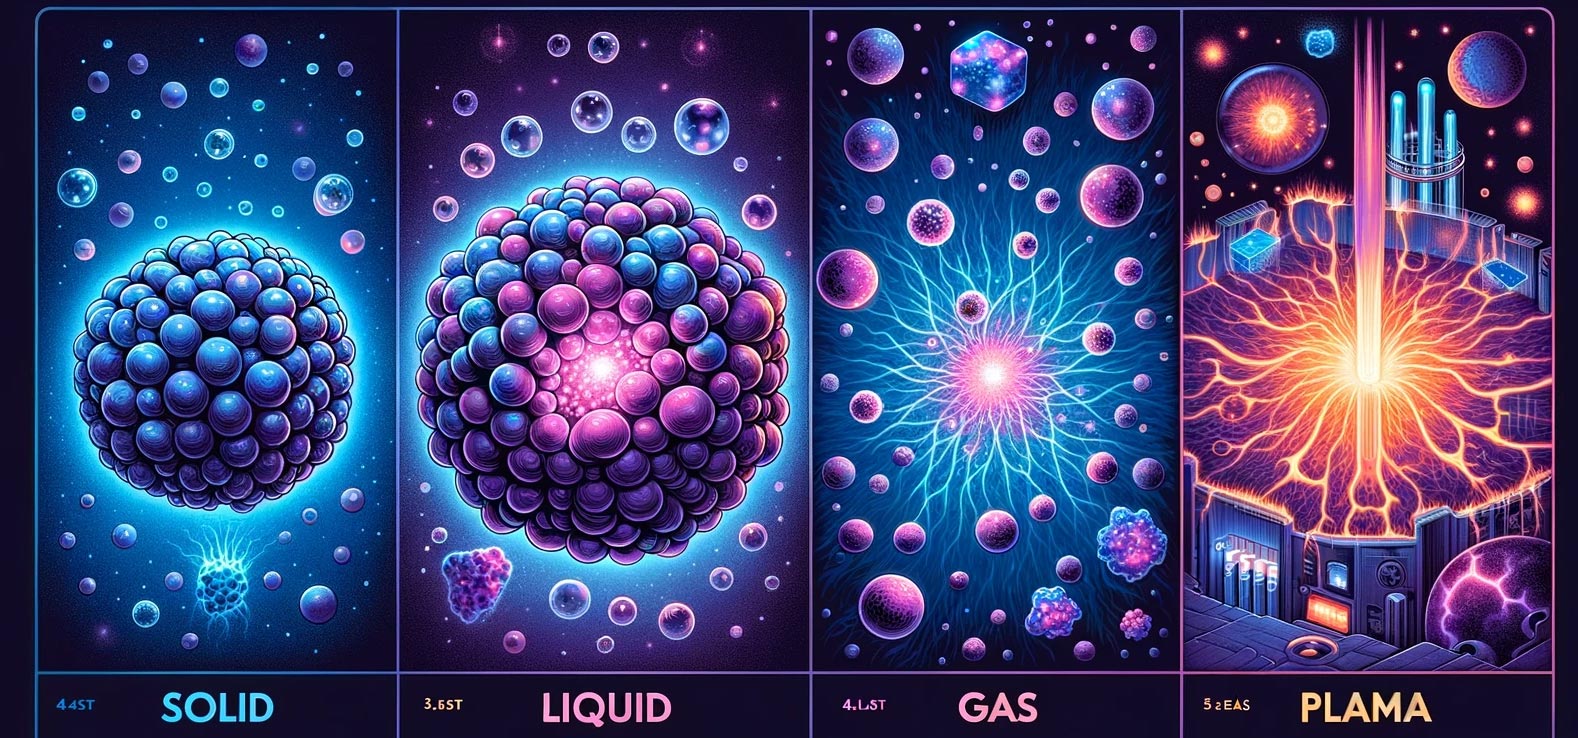 Plasma – The 4th Natural State